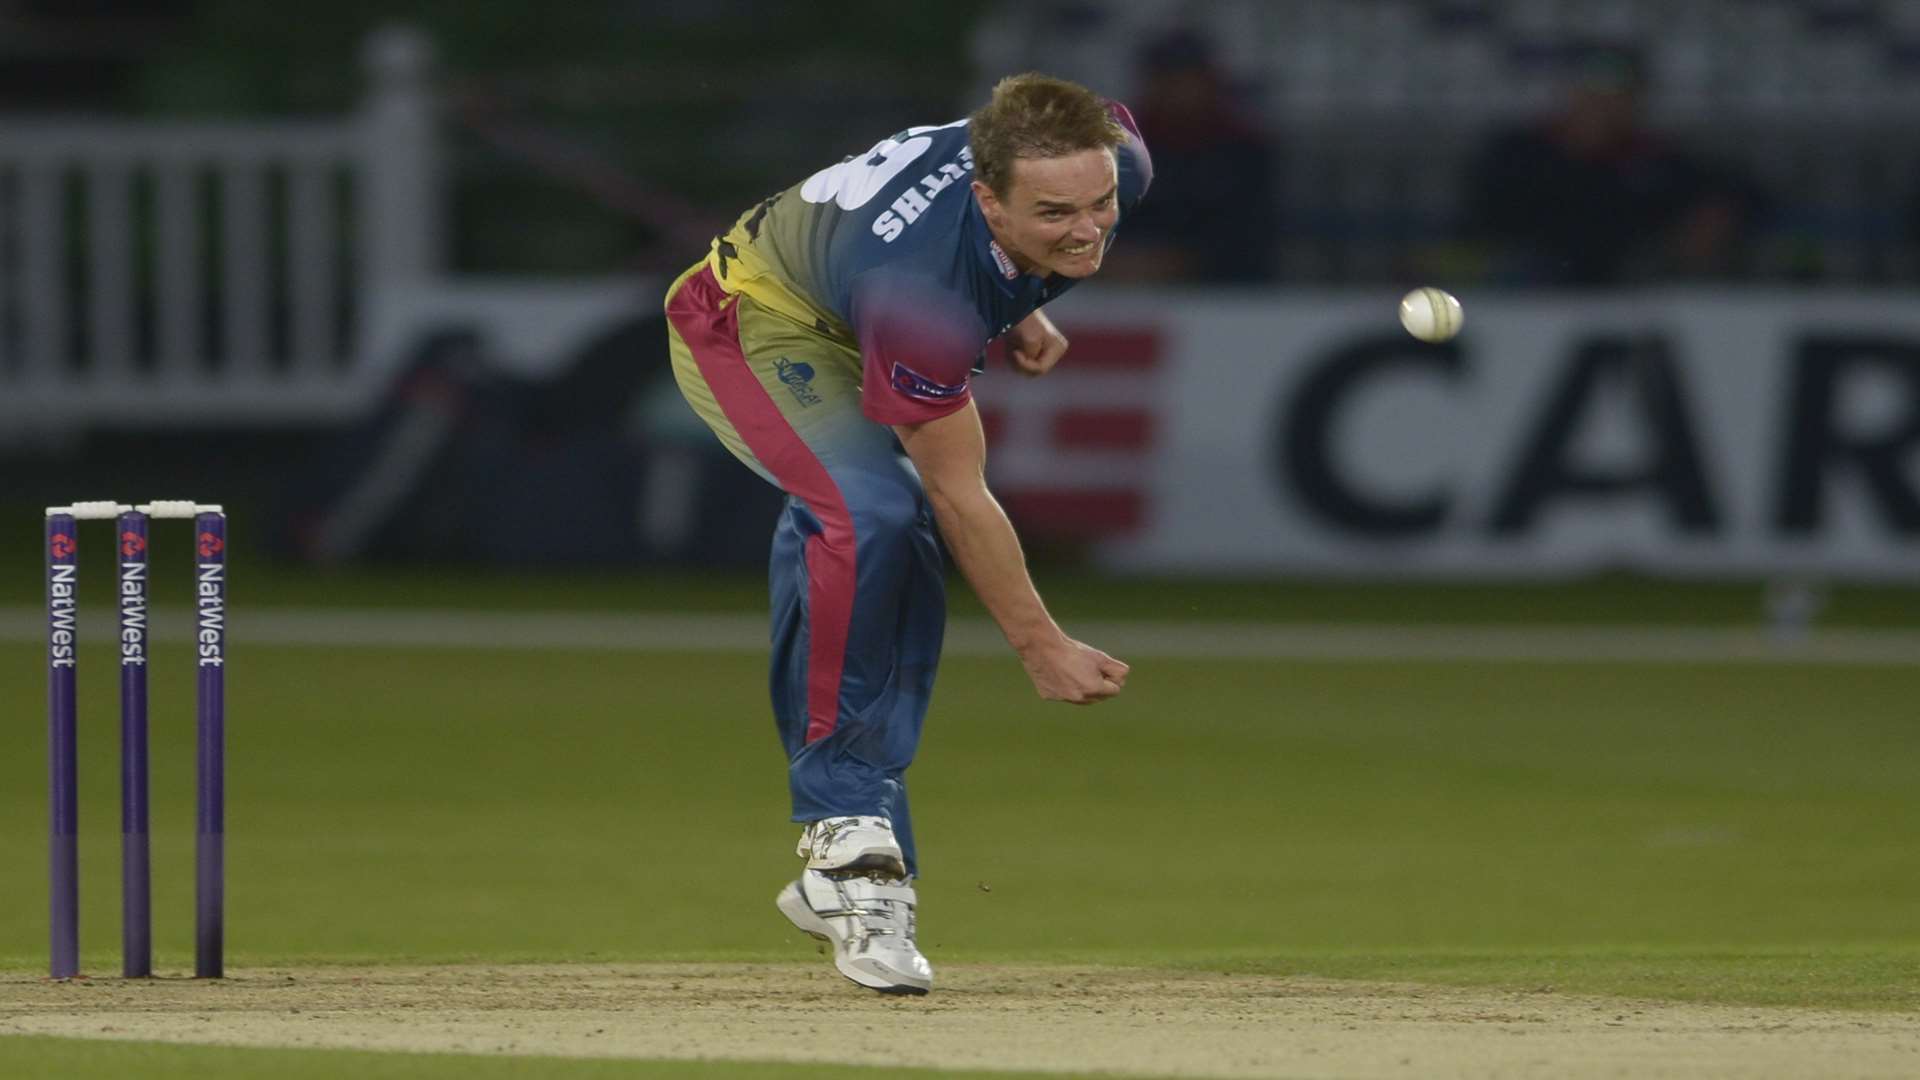 David Griffiths in action against Sussex. Picture: Barry Goodwin.